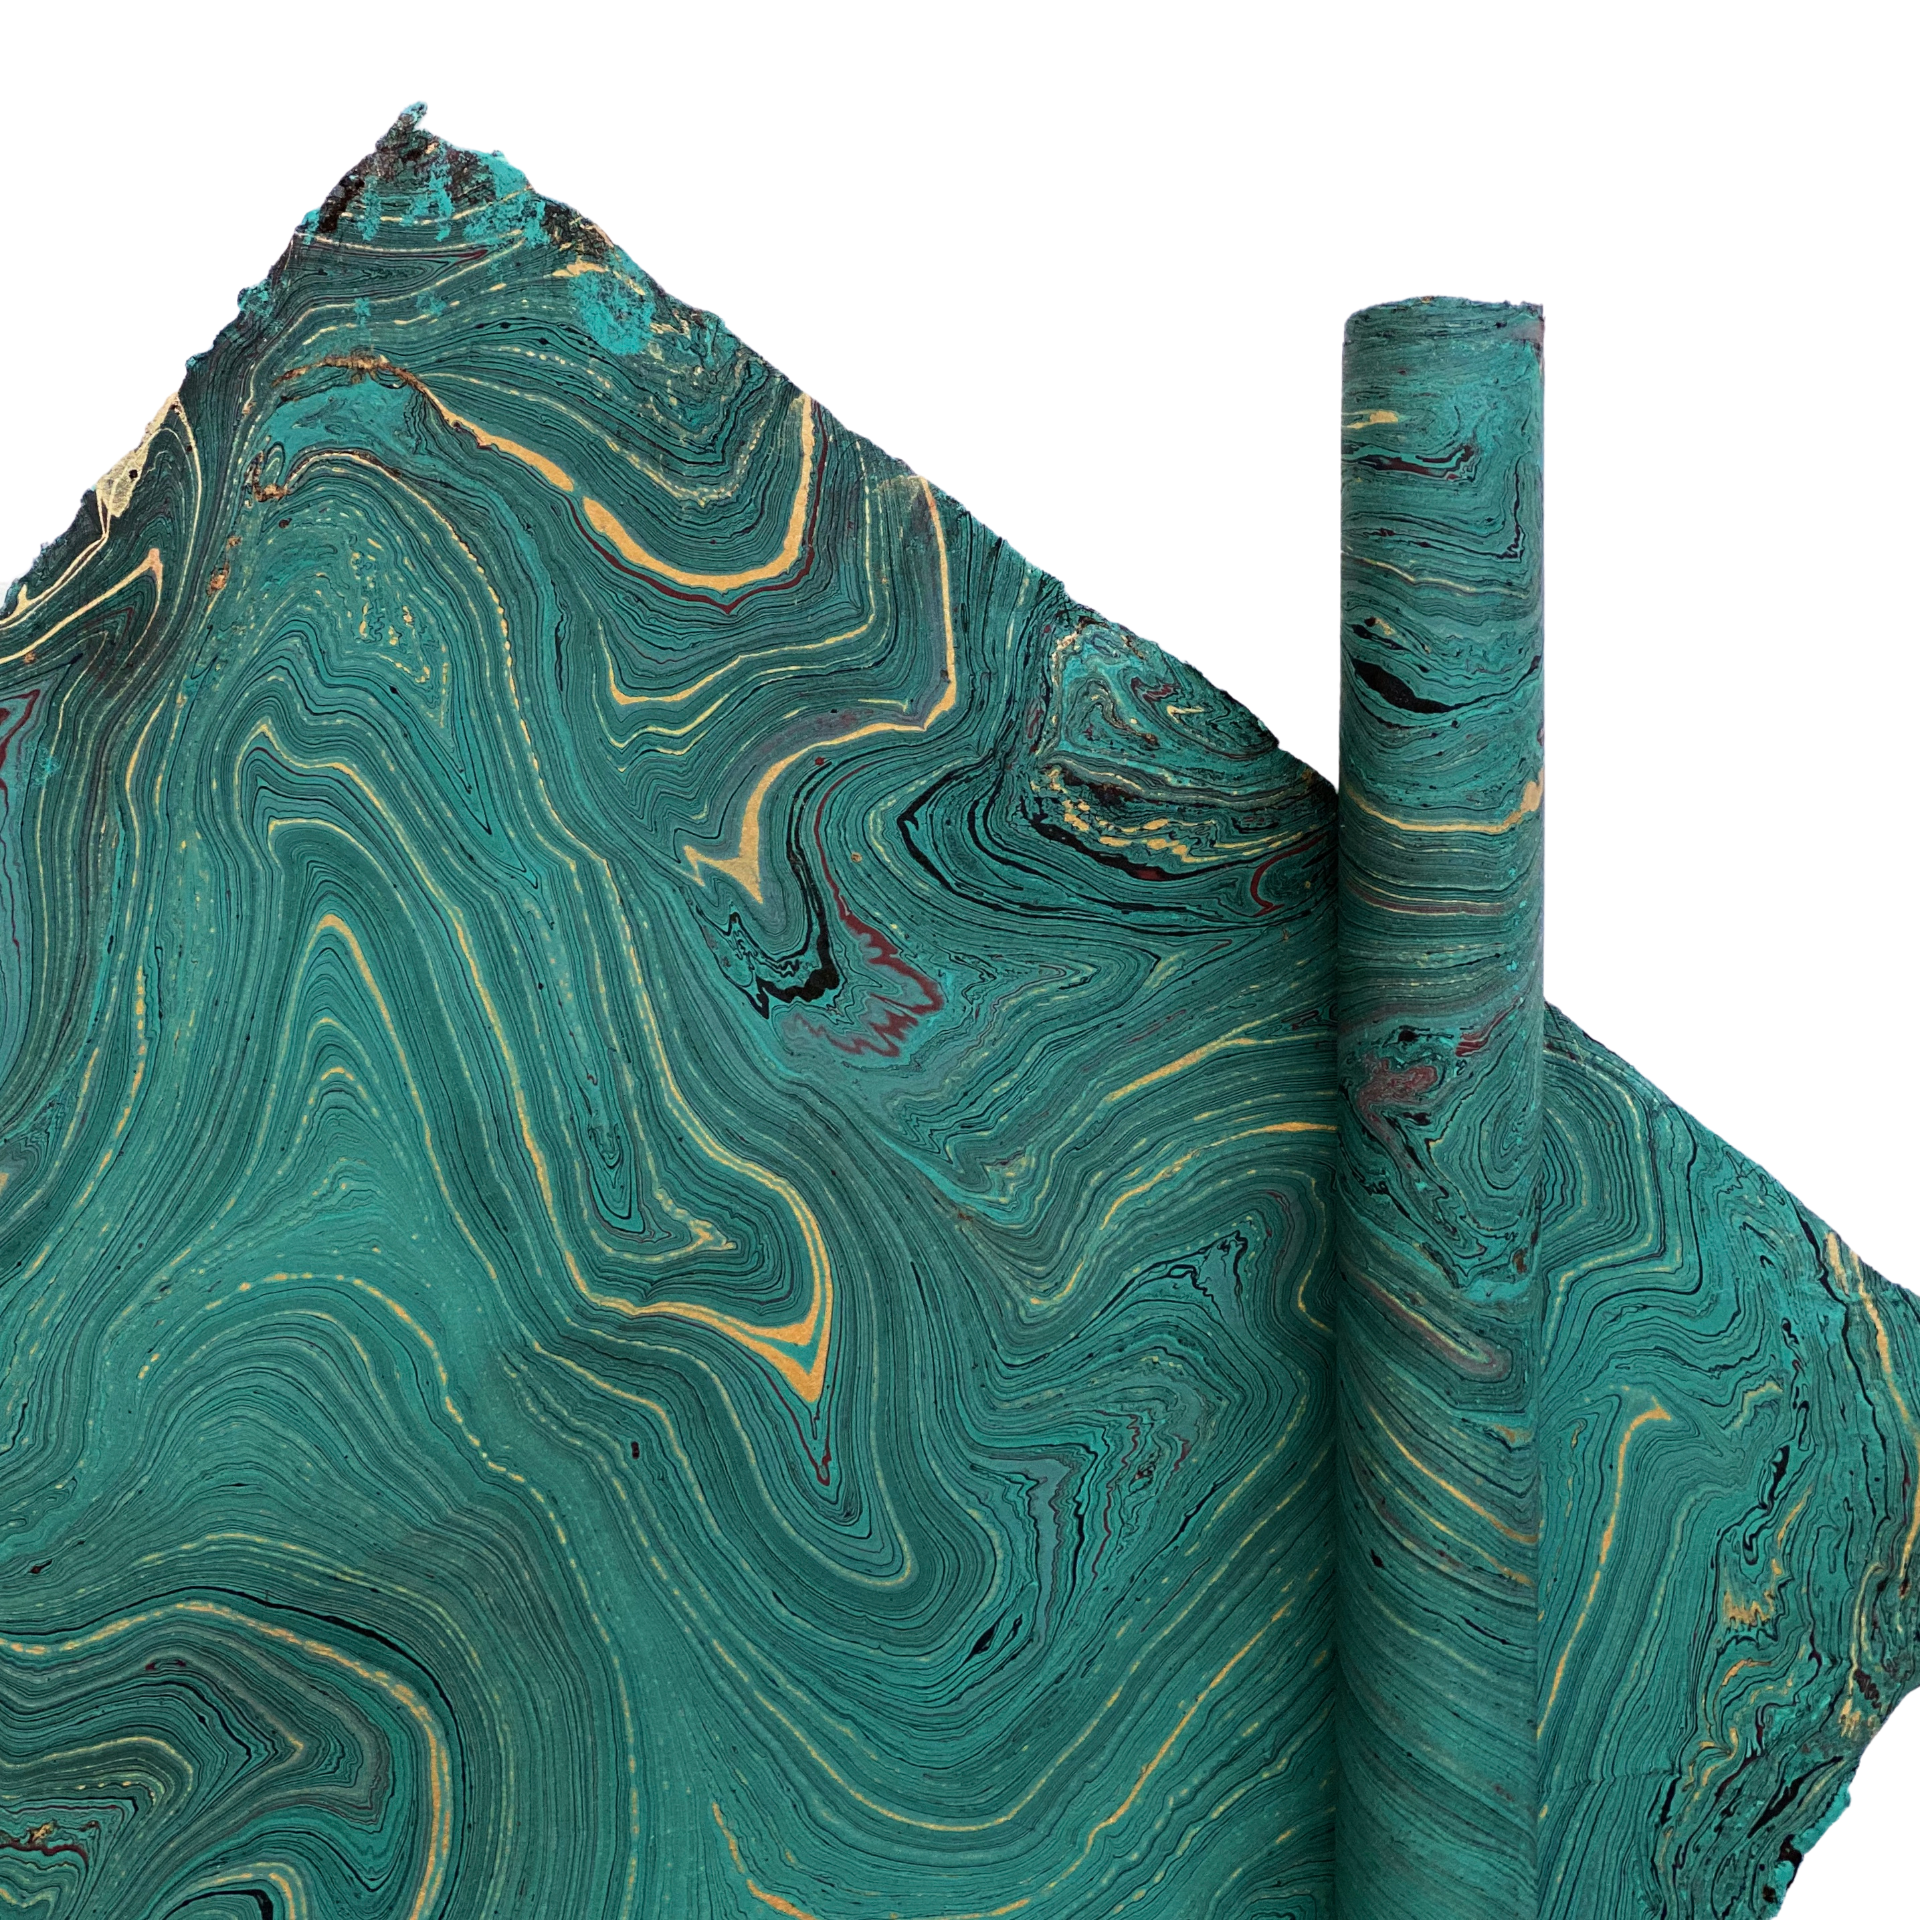 Handmade Teal and Gold Marbled Gift Wrap Paper